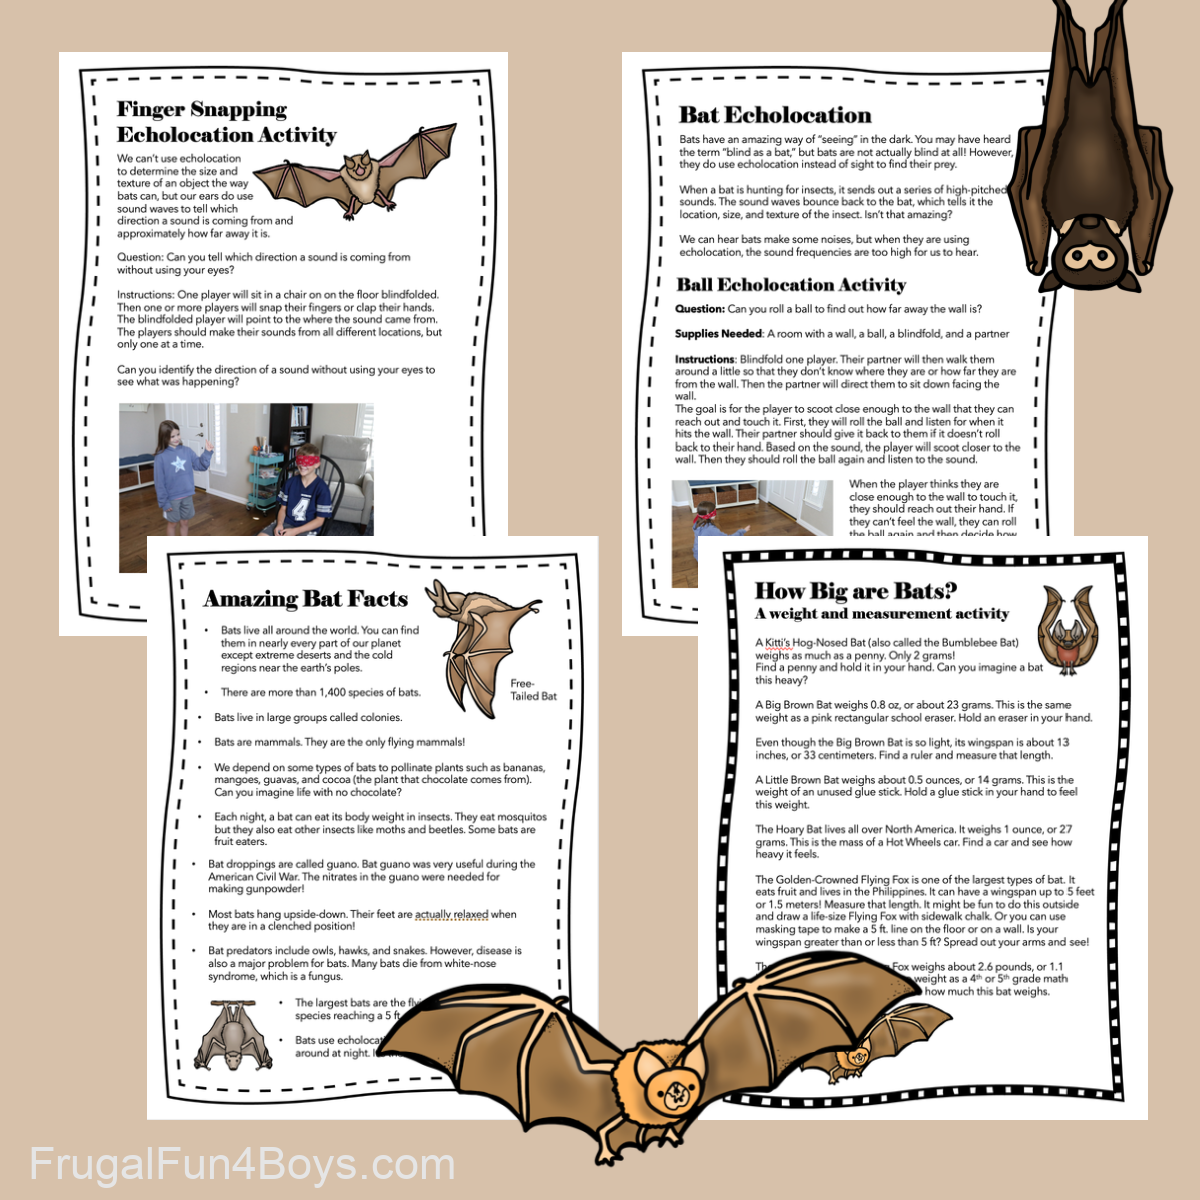 Printable pages with science and math activities about bats